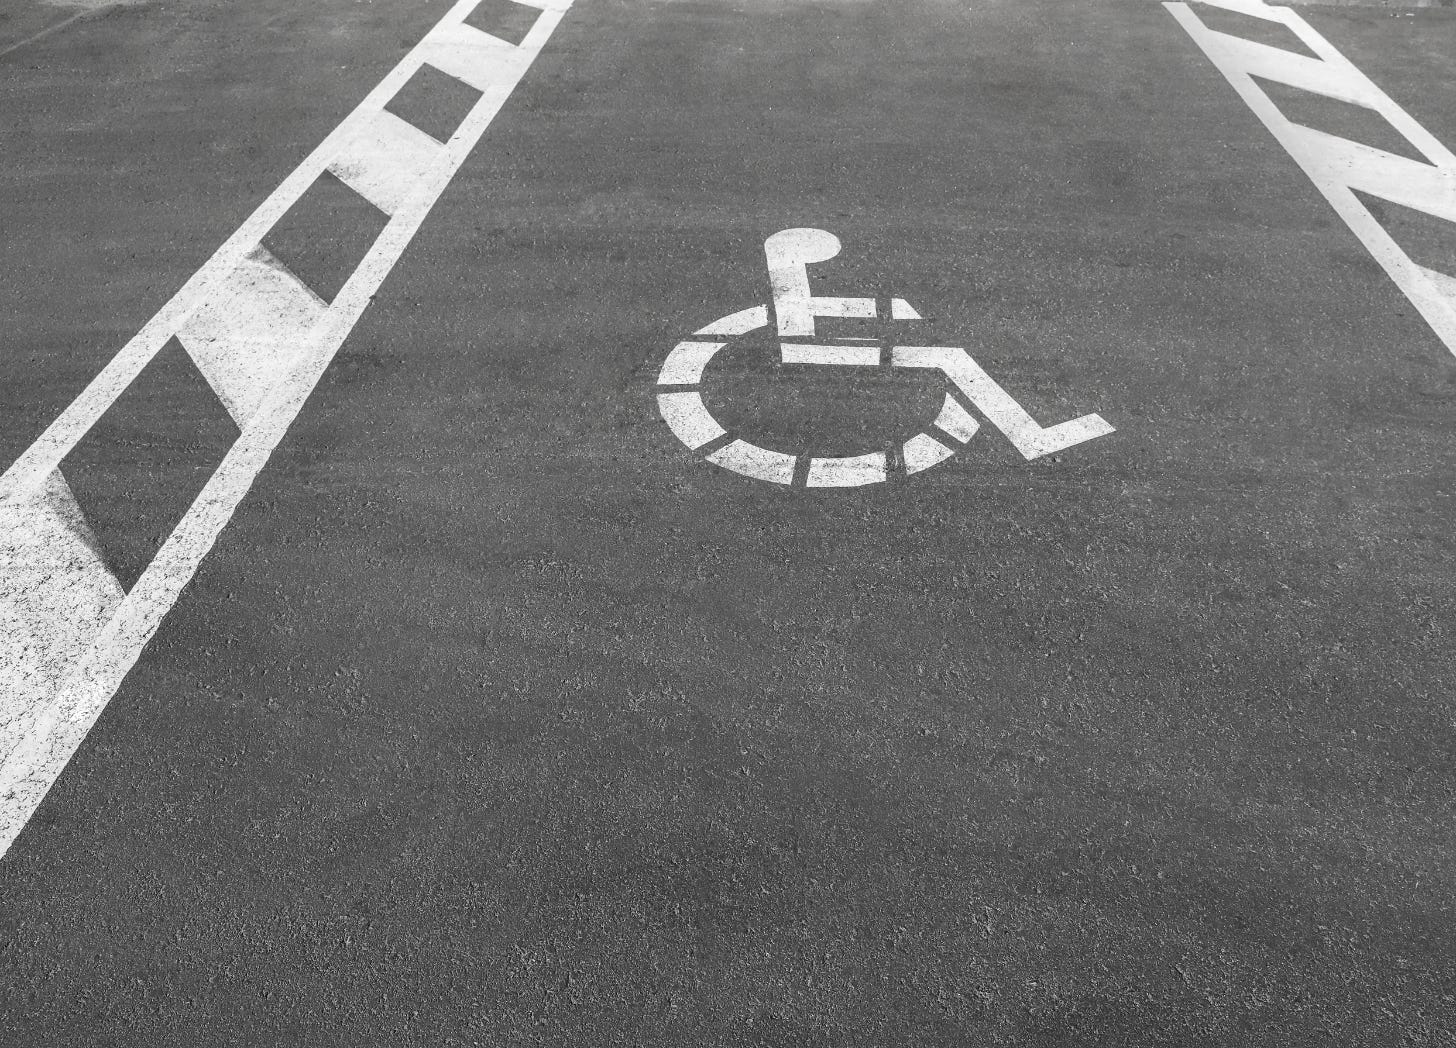 Wheelchair symbol painted onto pavement parking space